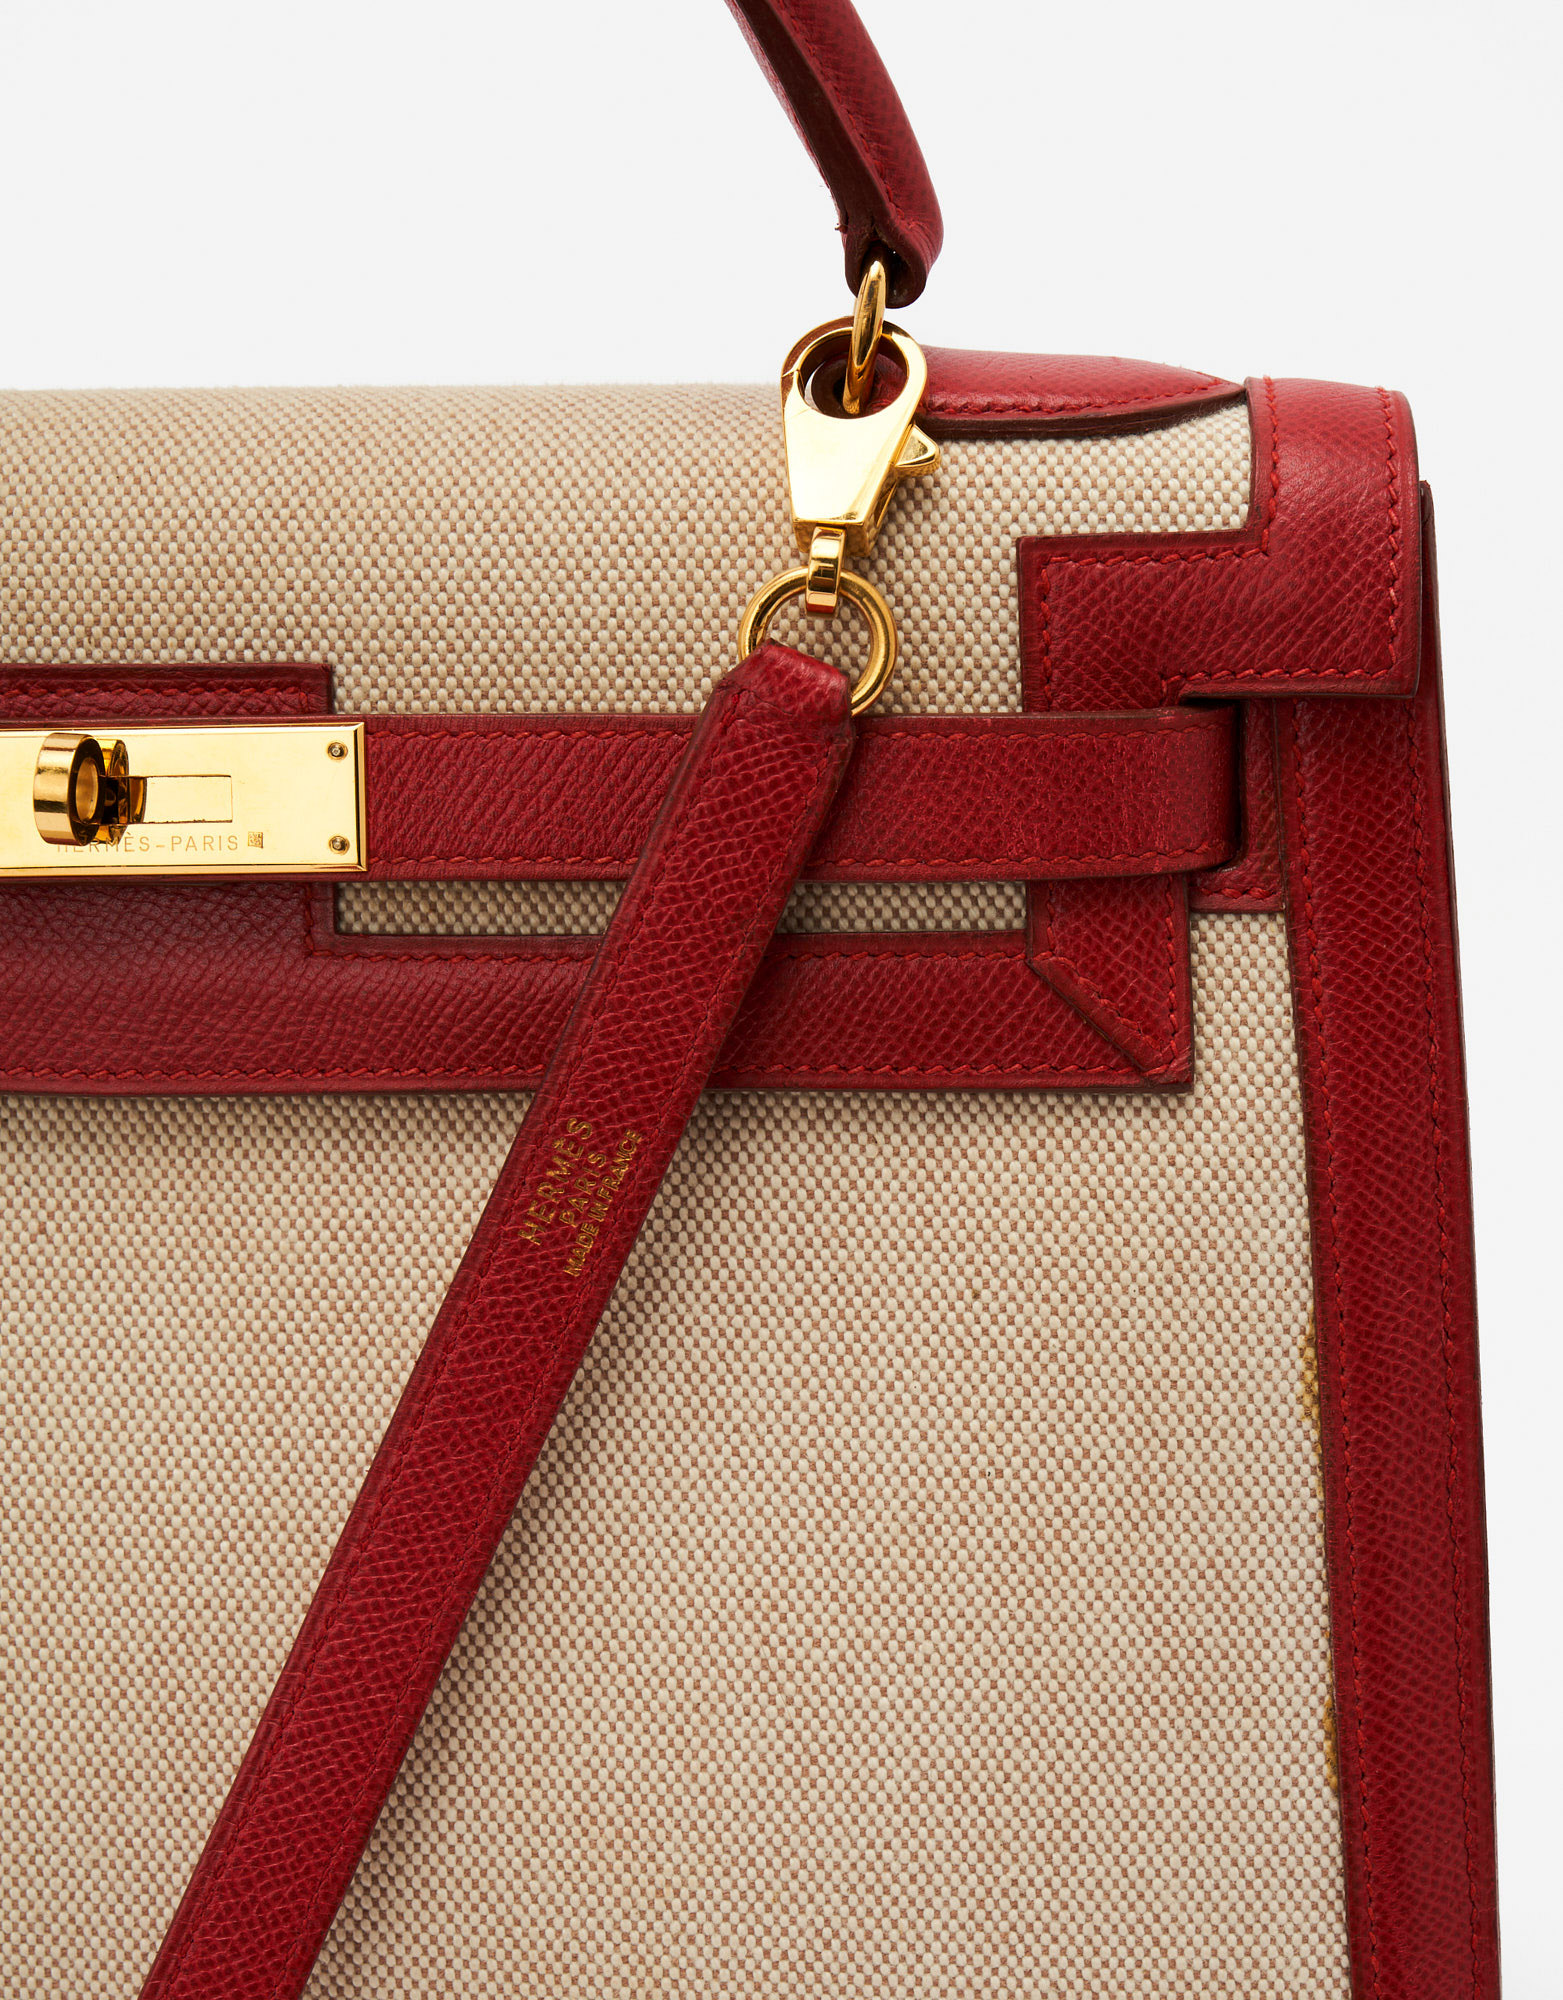 Hermes Kelly 32 cm Handbag in Red Courchevel Leather